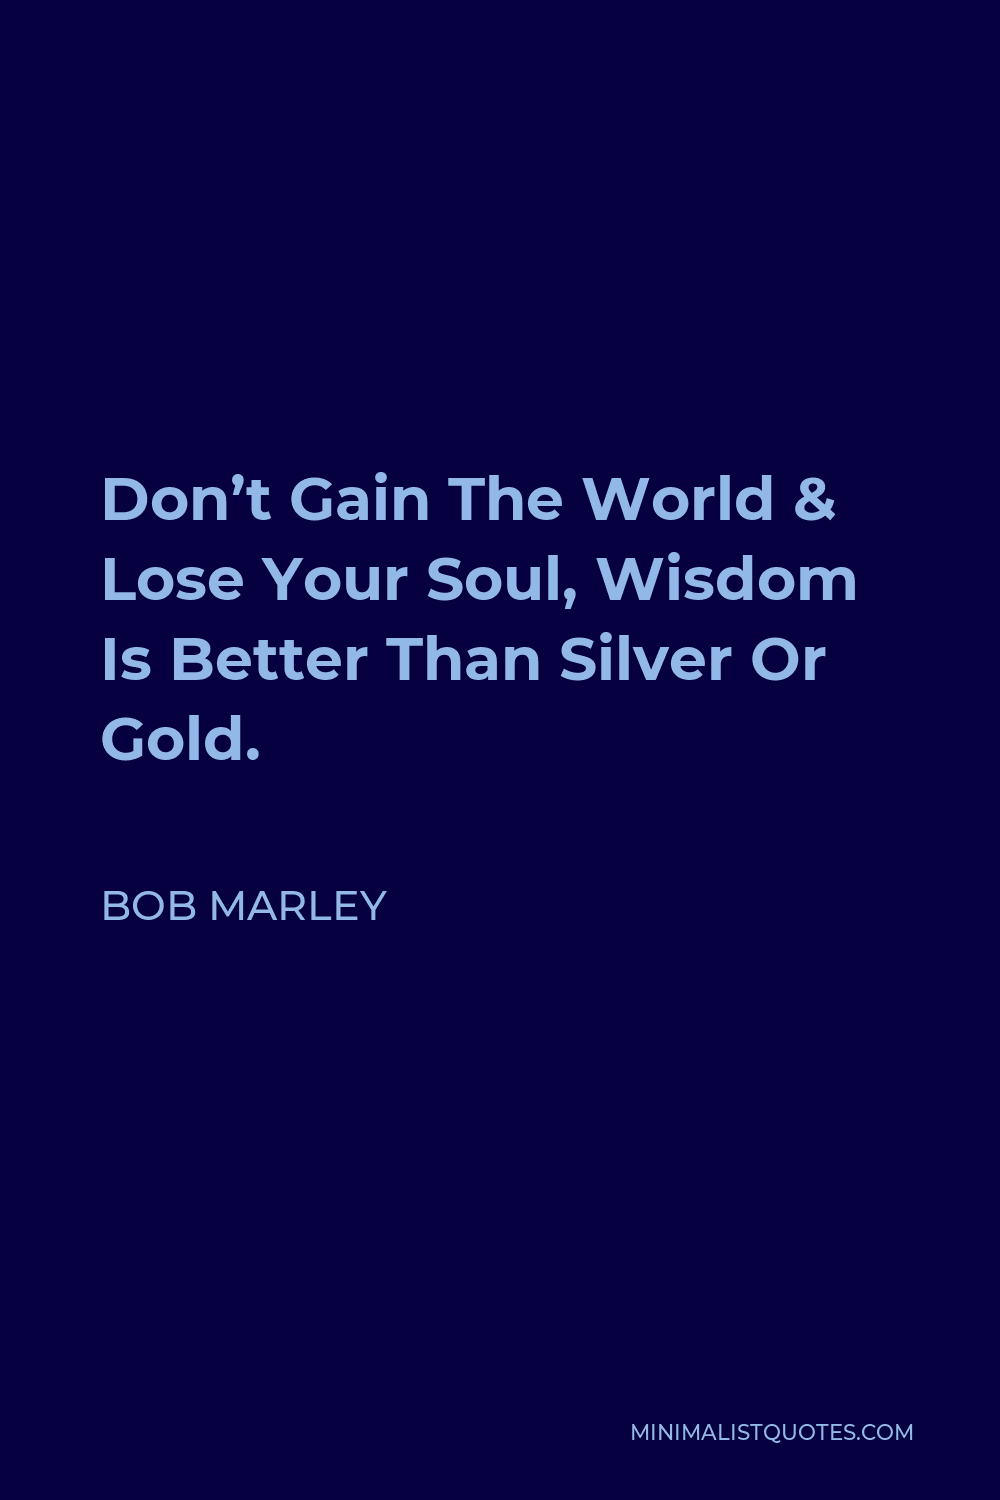 Bob Marley Quote - Don’t Gain The World & Lose Your Soul, Wisdom Is Better Than Silver Or Gold.